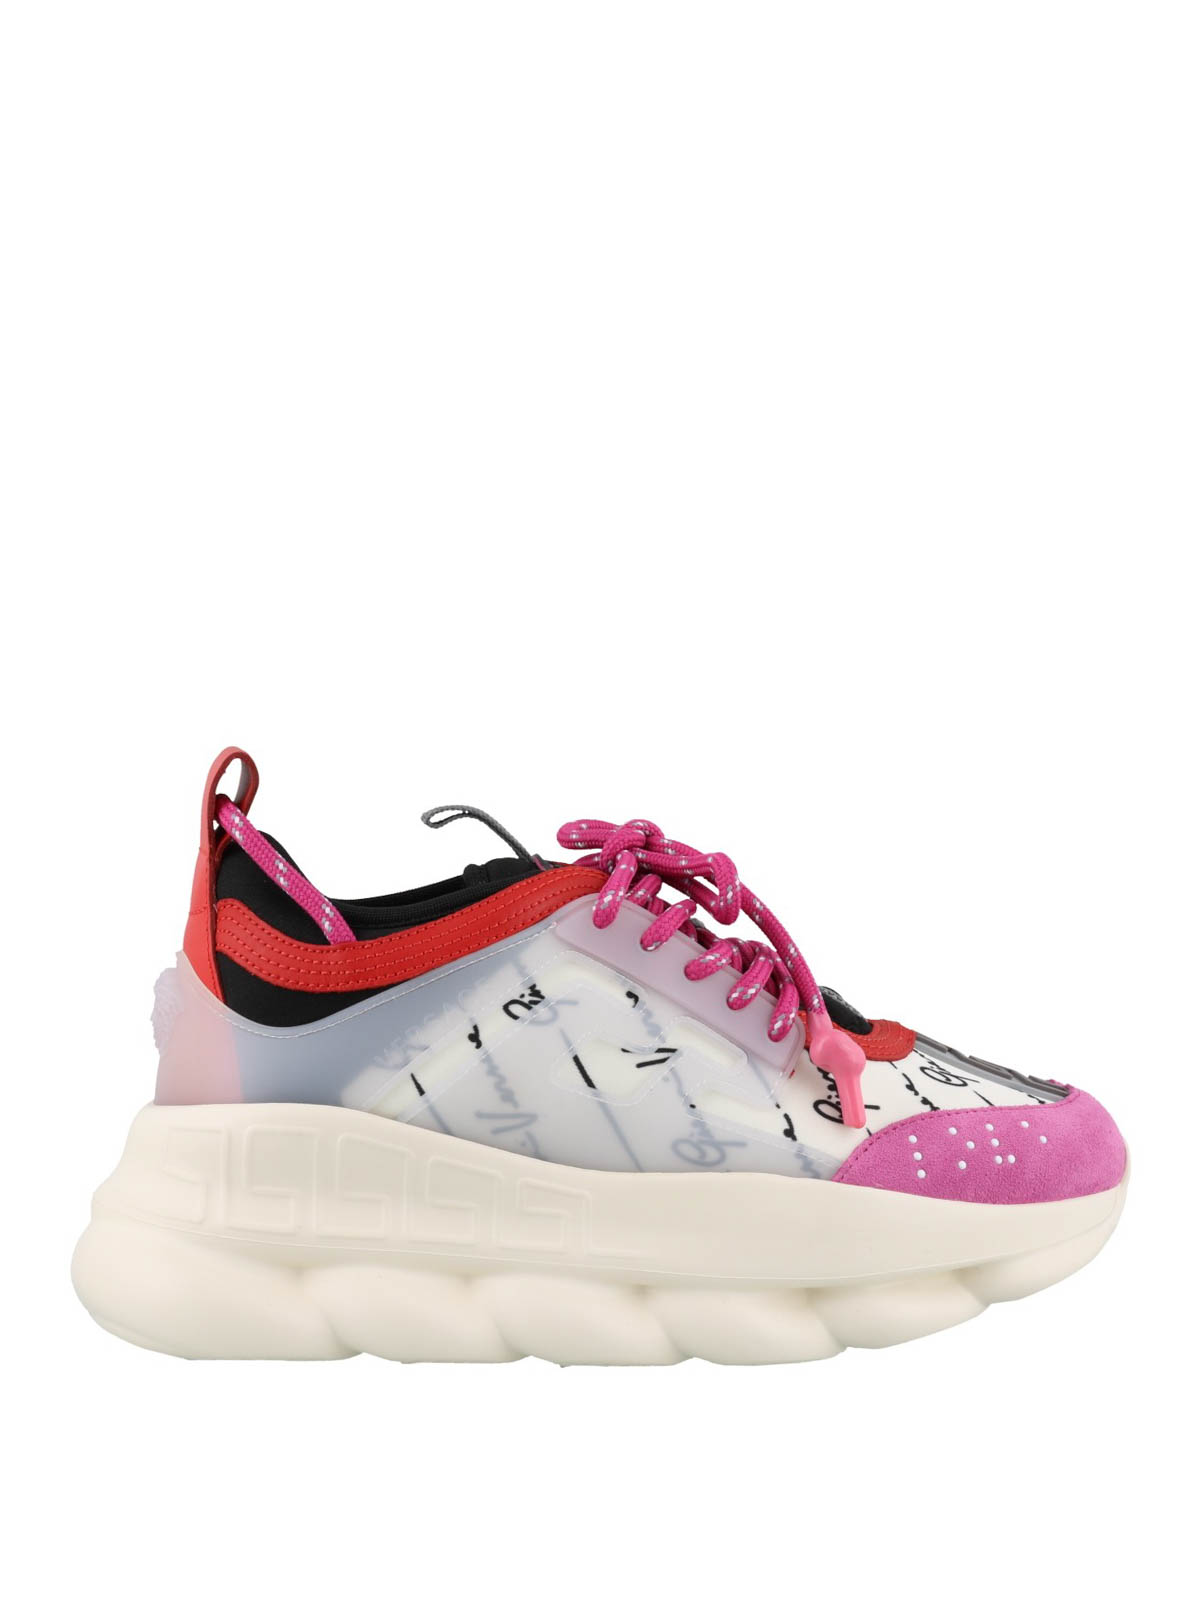 Versace Women's Shoes Trainers Sneakers Chain Reaction in Pink